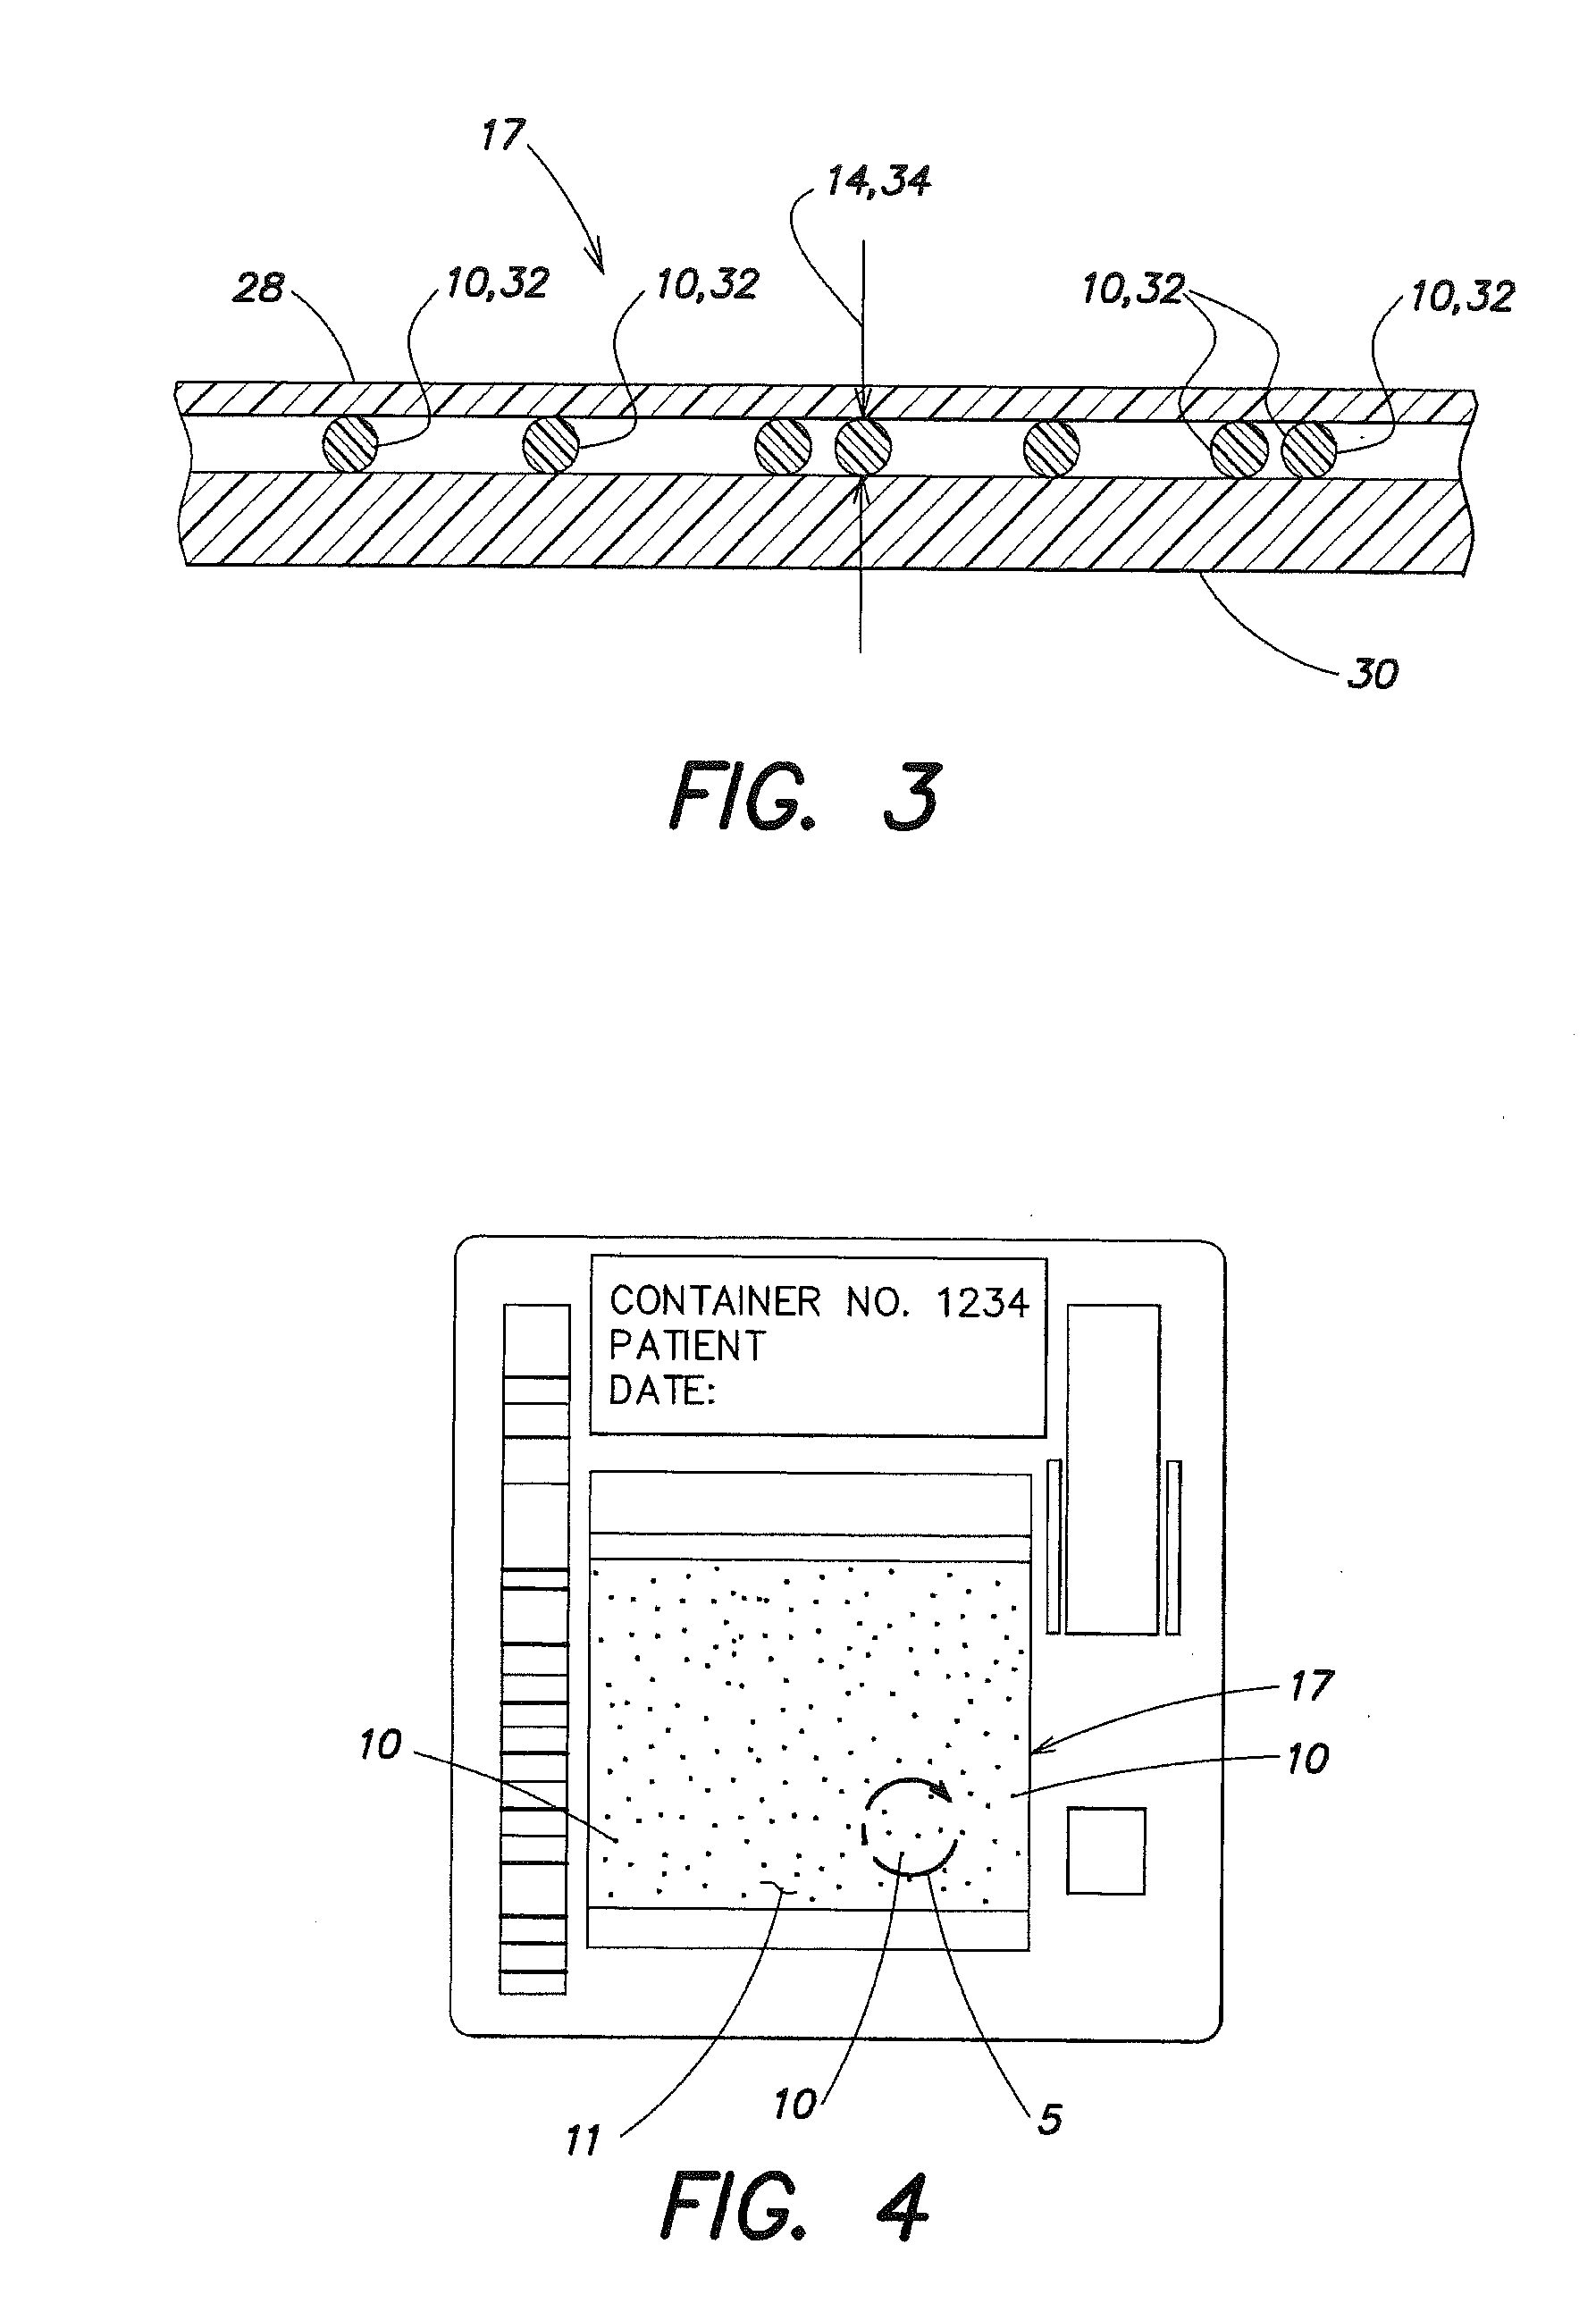 Method and apparatus for determining a focal position of an imaging device adapted to image a biologic sample